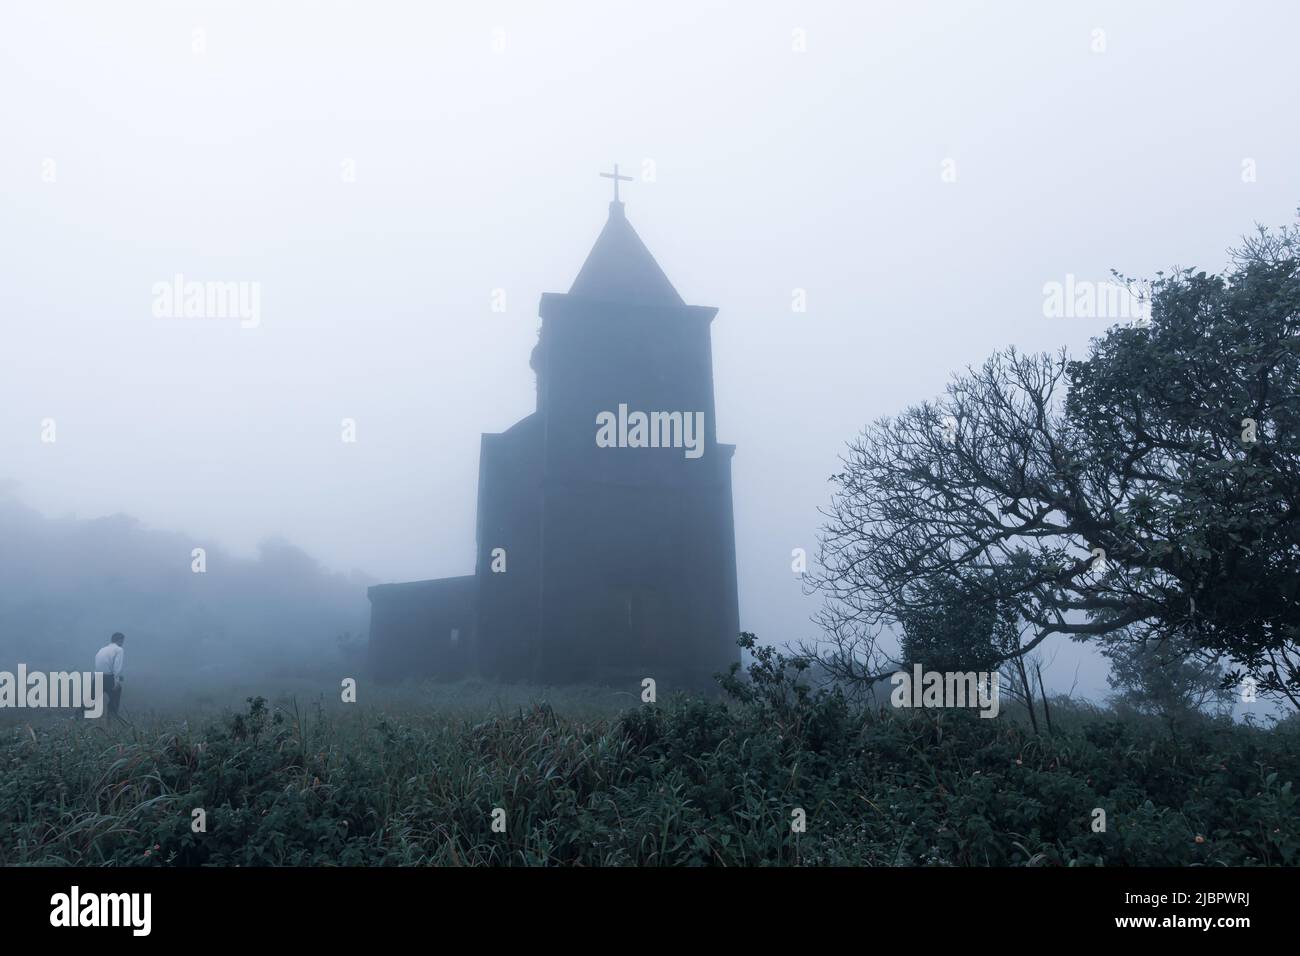 A man walks toward the abandoned Catholic church in fog, the church was built by the French in 1928. Damrei Mountains, Kampot, Cambodia. Stock Photo